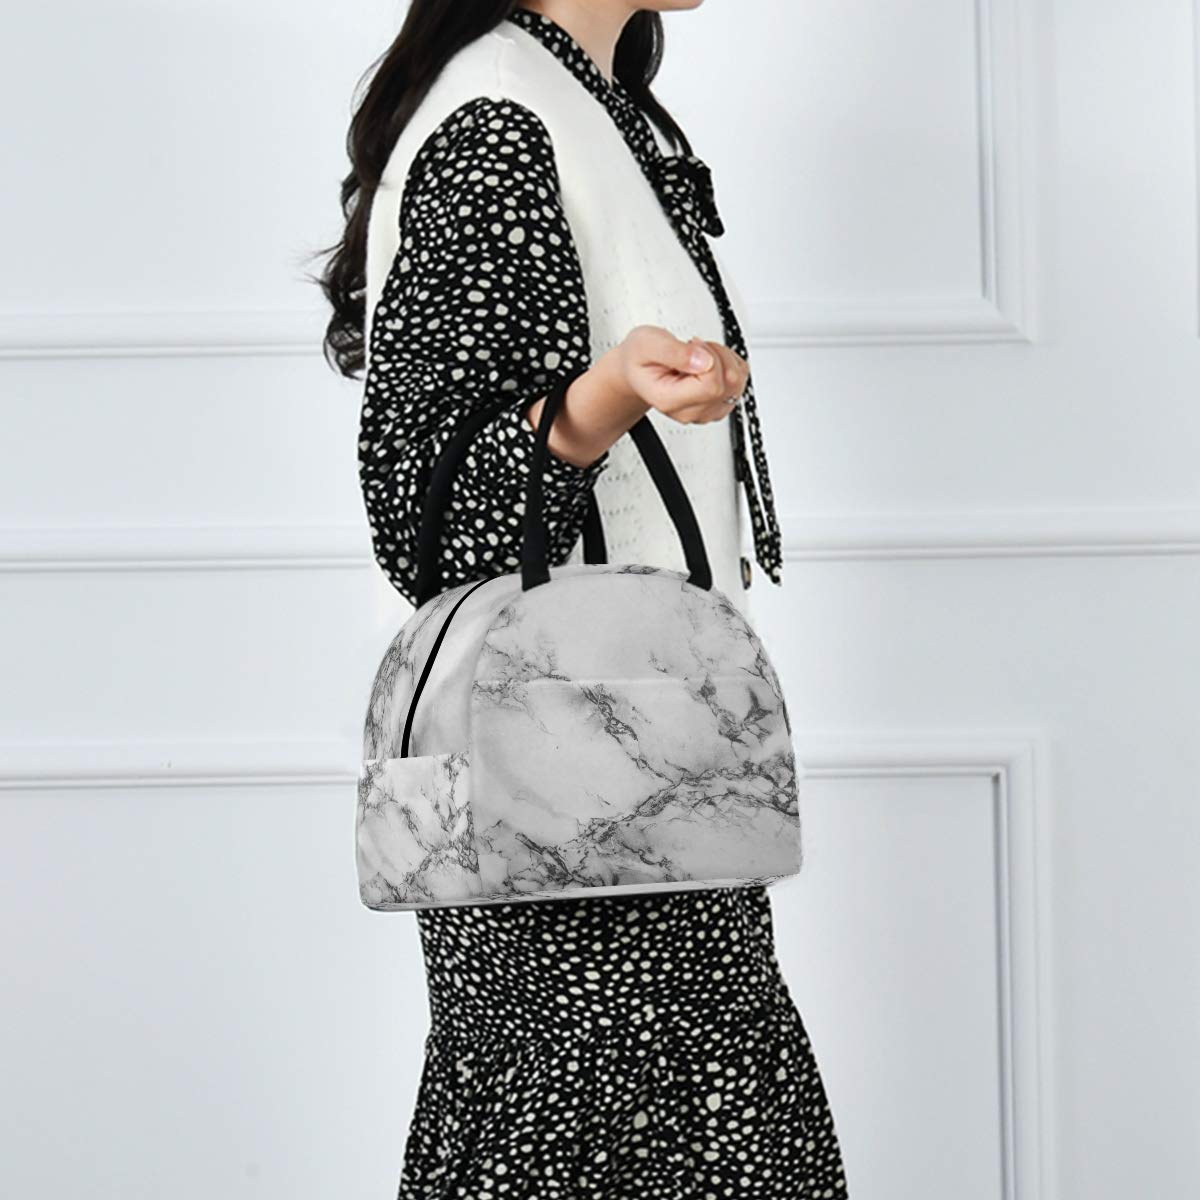 senya Lunch Bag, White Marble Black Texture Insulated Lunch Box Cooler Bag Tote Bag for Women Kids/Picnic/School/Work